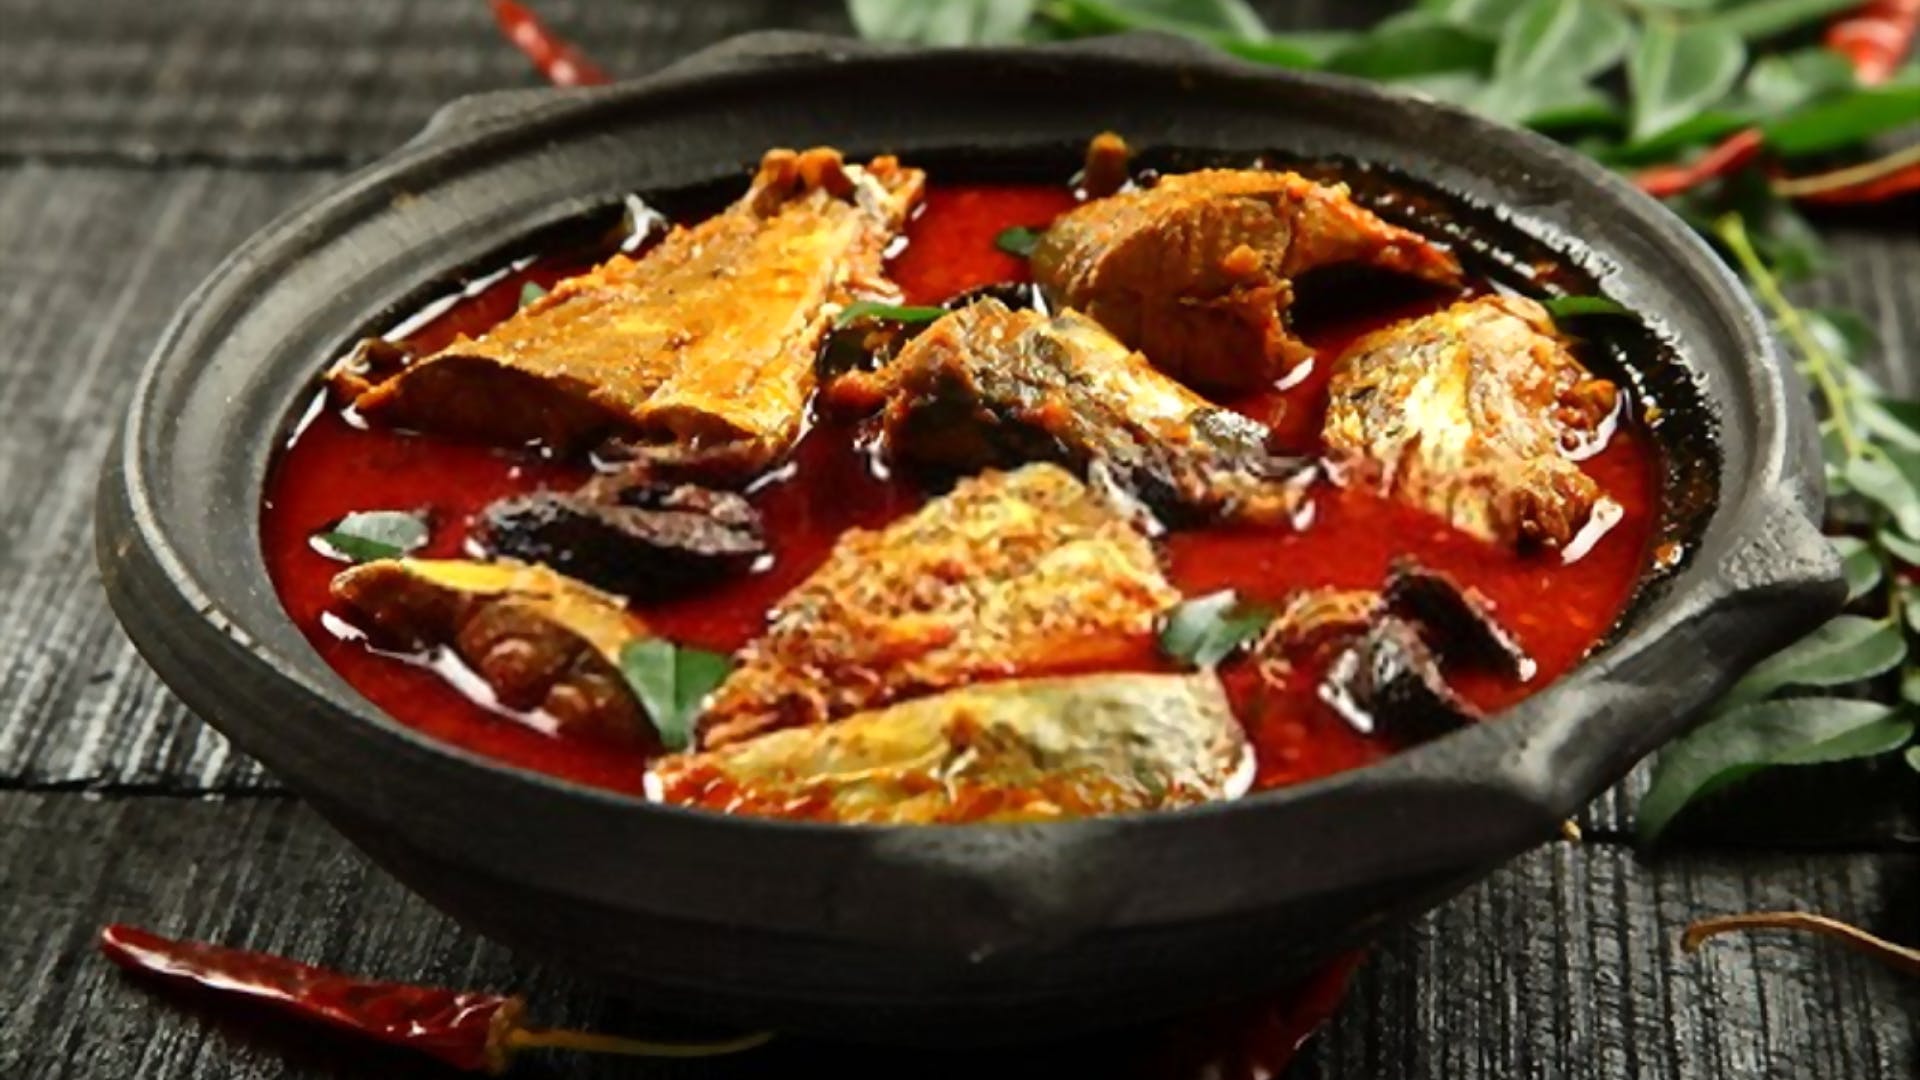 Dish,Food,Cuisine,Ingredient,Meat,Produce,Curry,Recipe,Asam pedas,Red curry